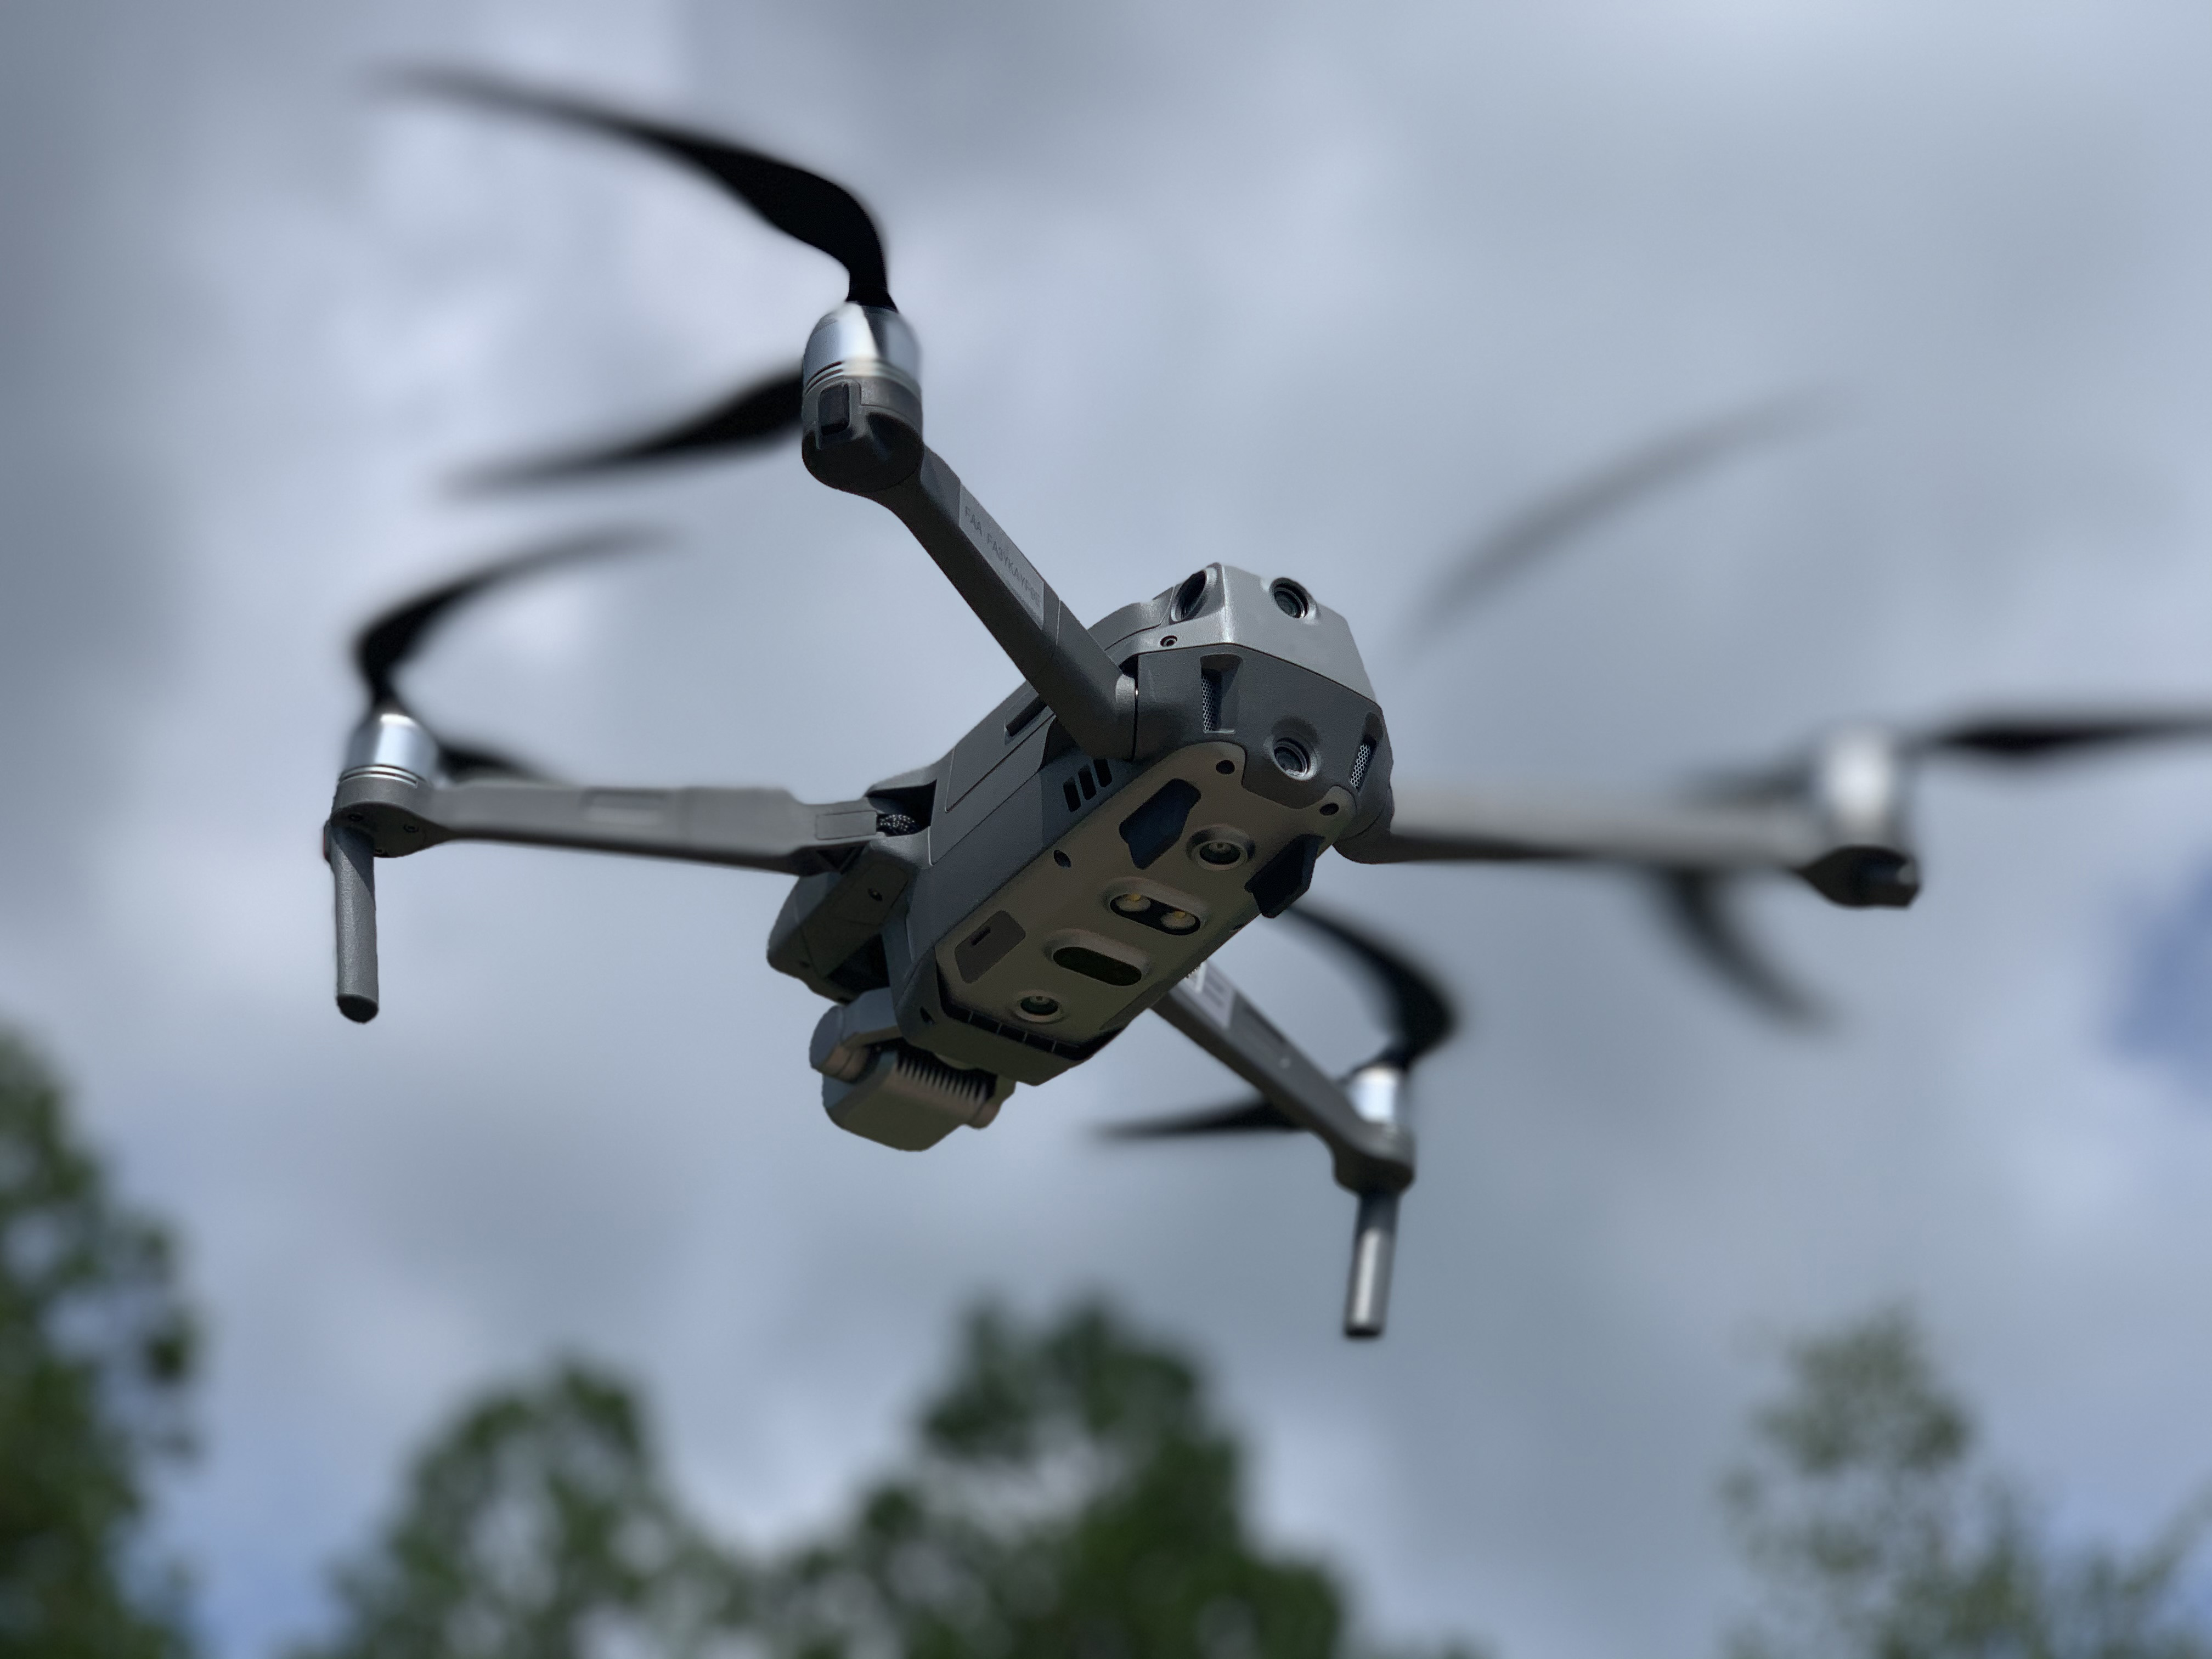 Close up photo of an unmanned aerial system flying in midair.